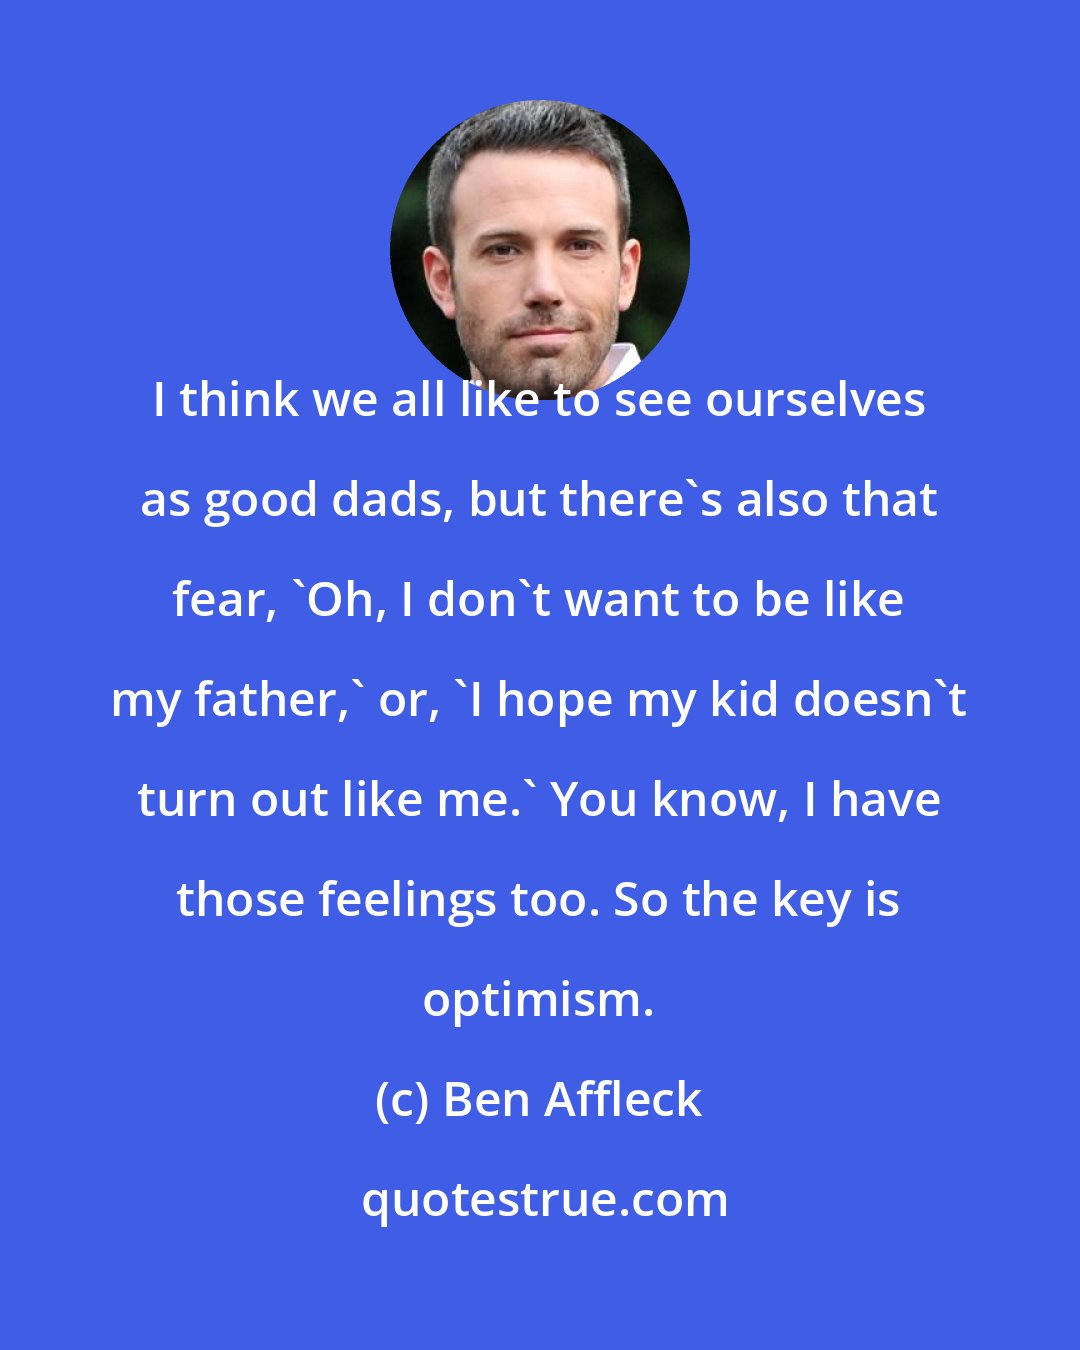 Ben Affleck: I think we all like to see ourselves as good dads, but there's also that fear, 'Oh, I don't want to be like my father,' or, 'I hope my kid doesn't turn out like me.' You know, I have those feelings too. So the key is optimism.